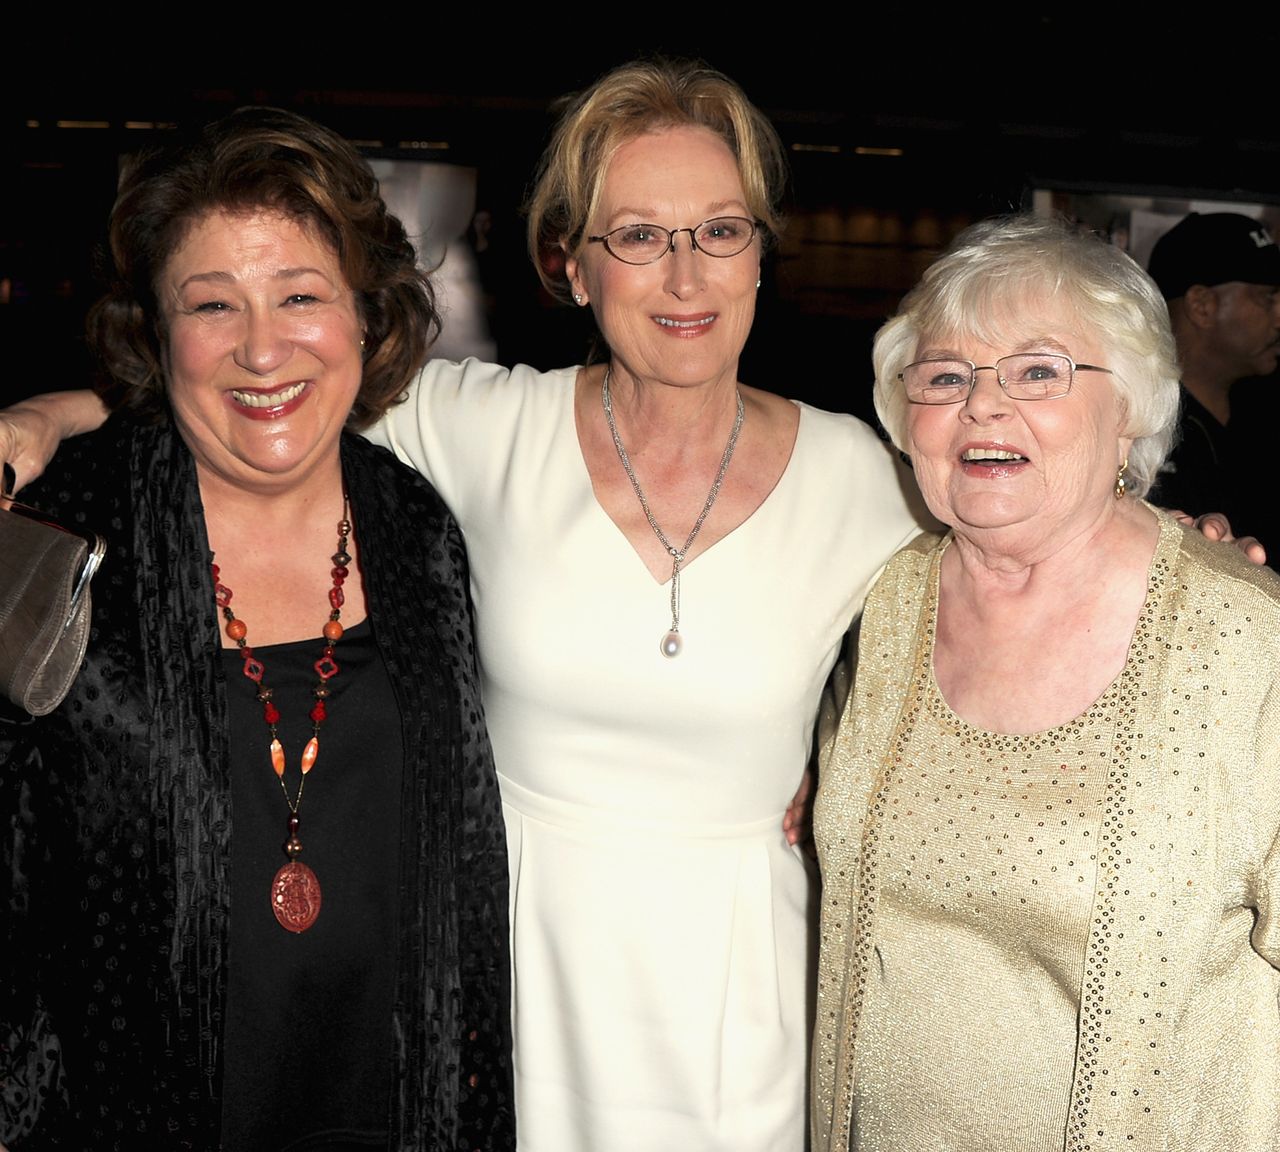 Margo Martindale, Meryl Streep and June Squibb attend the premiere of "August: Osage County" at Regal Cinemas LA Live on Dec. 16, 2013, in Los Angeles.